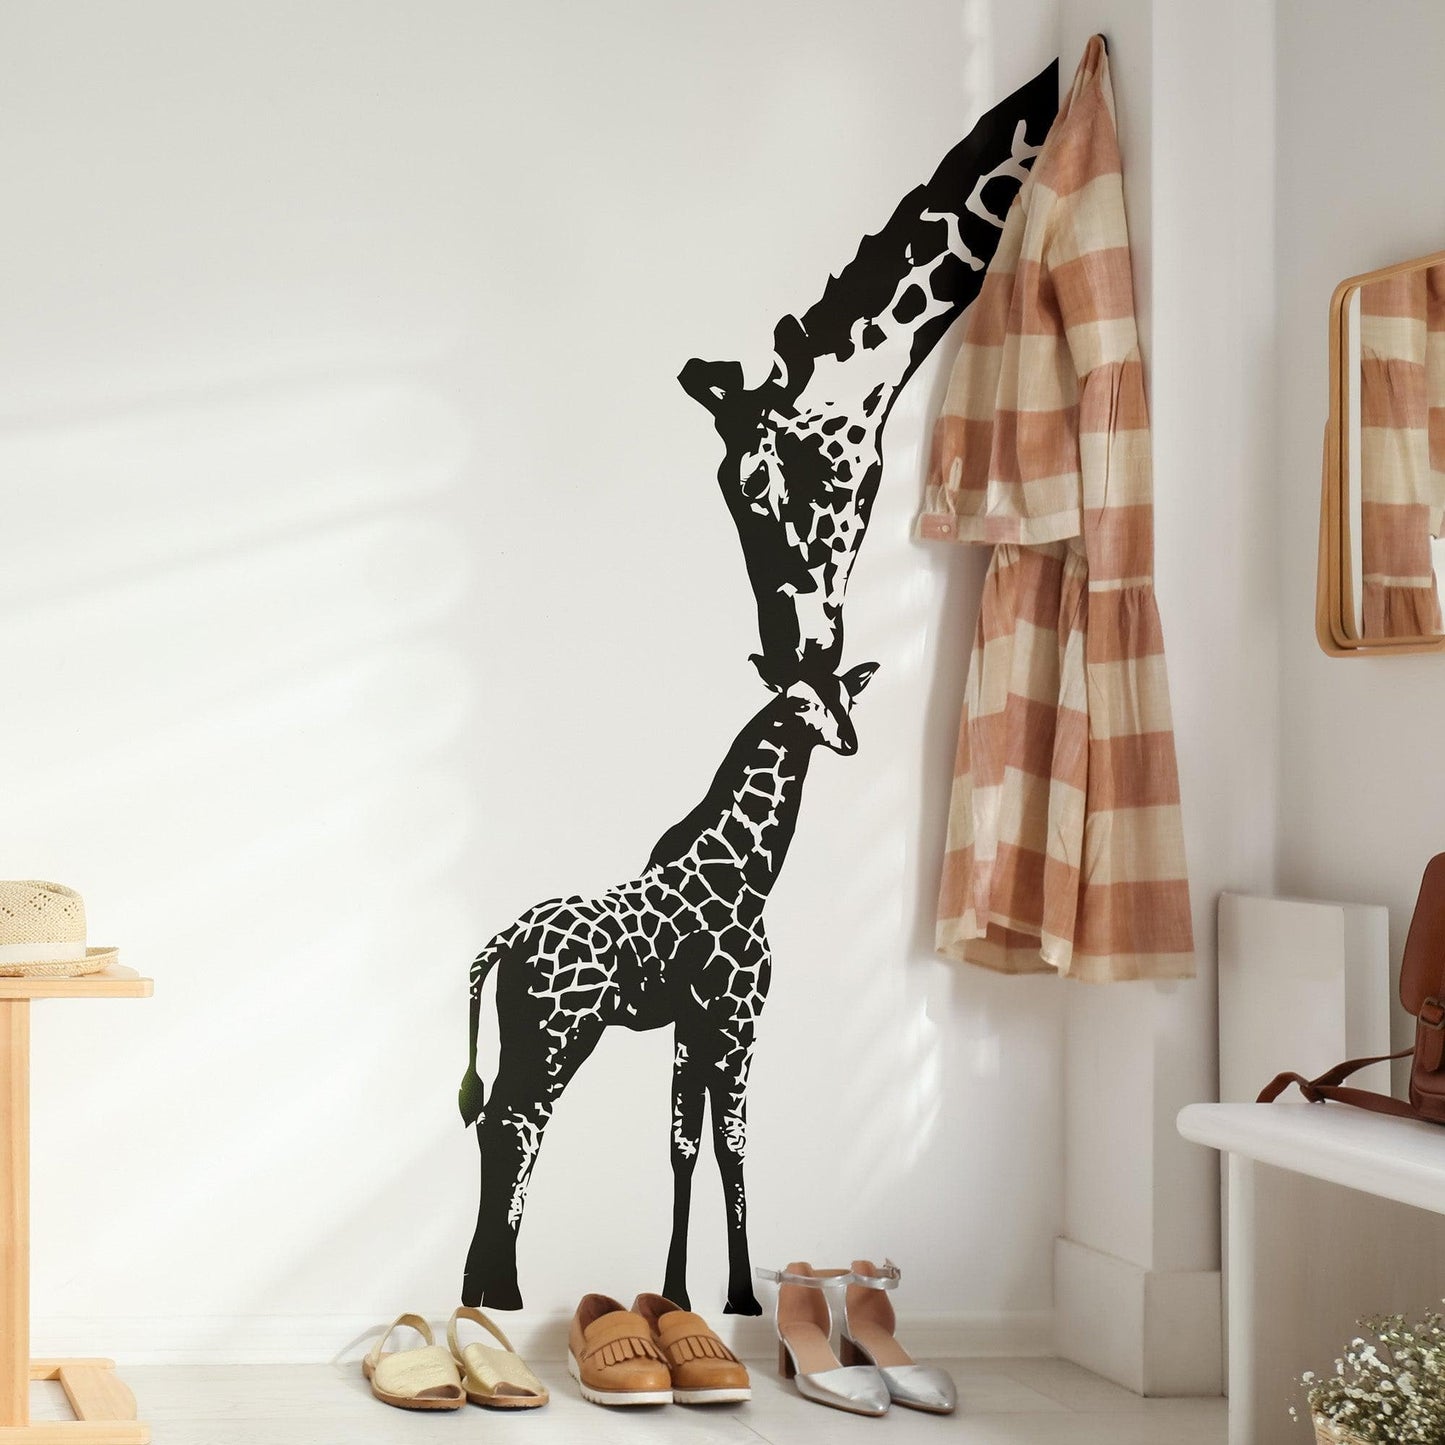 A black adult giraffe and a young giraffe decal on a white wall near shoes and a towel.